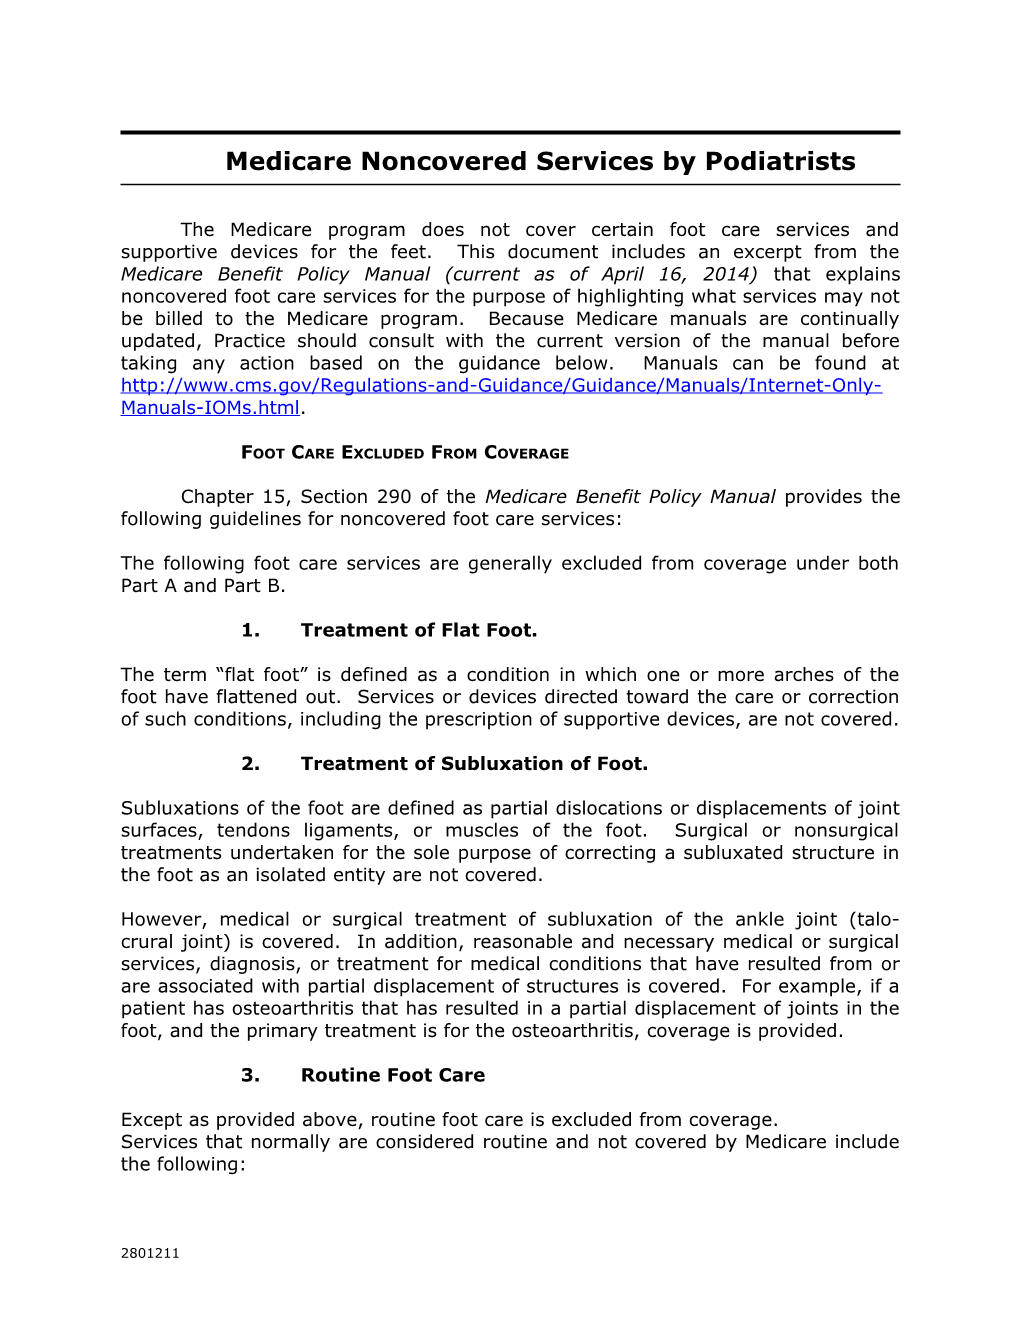 Medicare Noncovered Services by Podiatrists